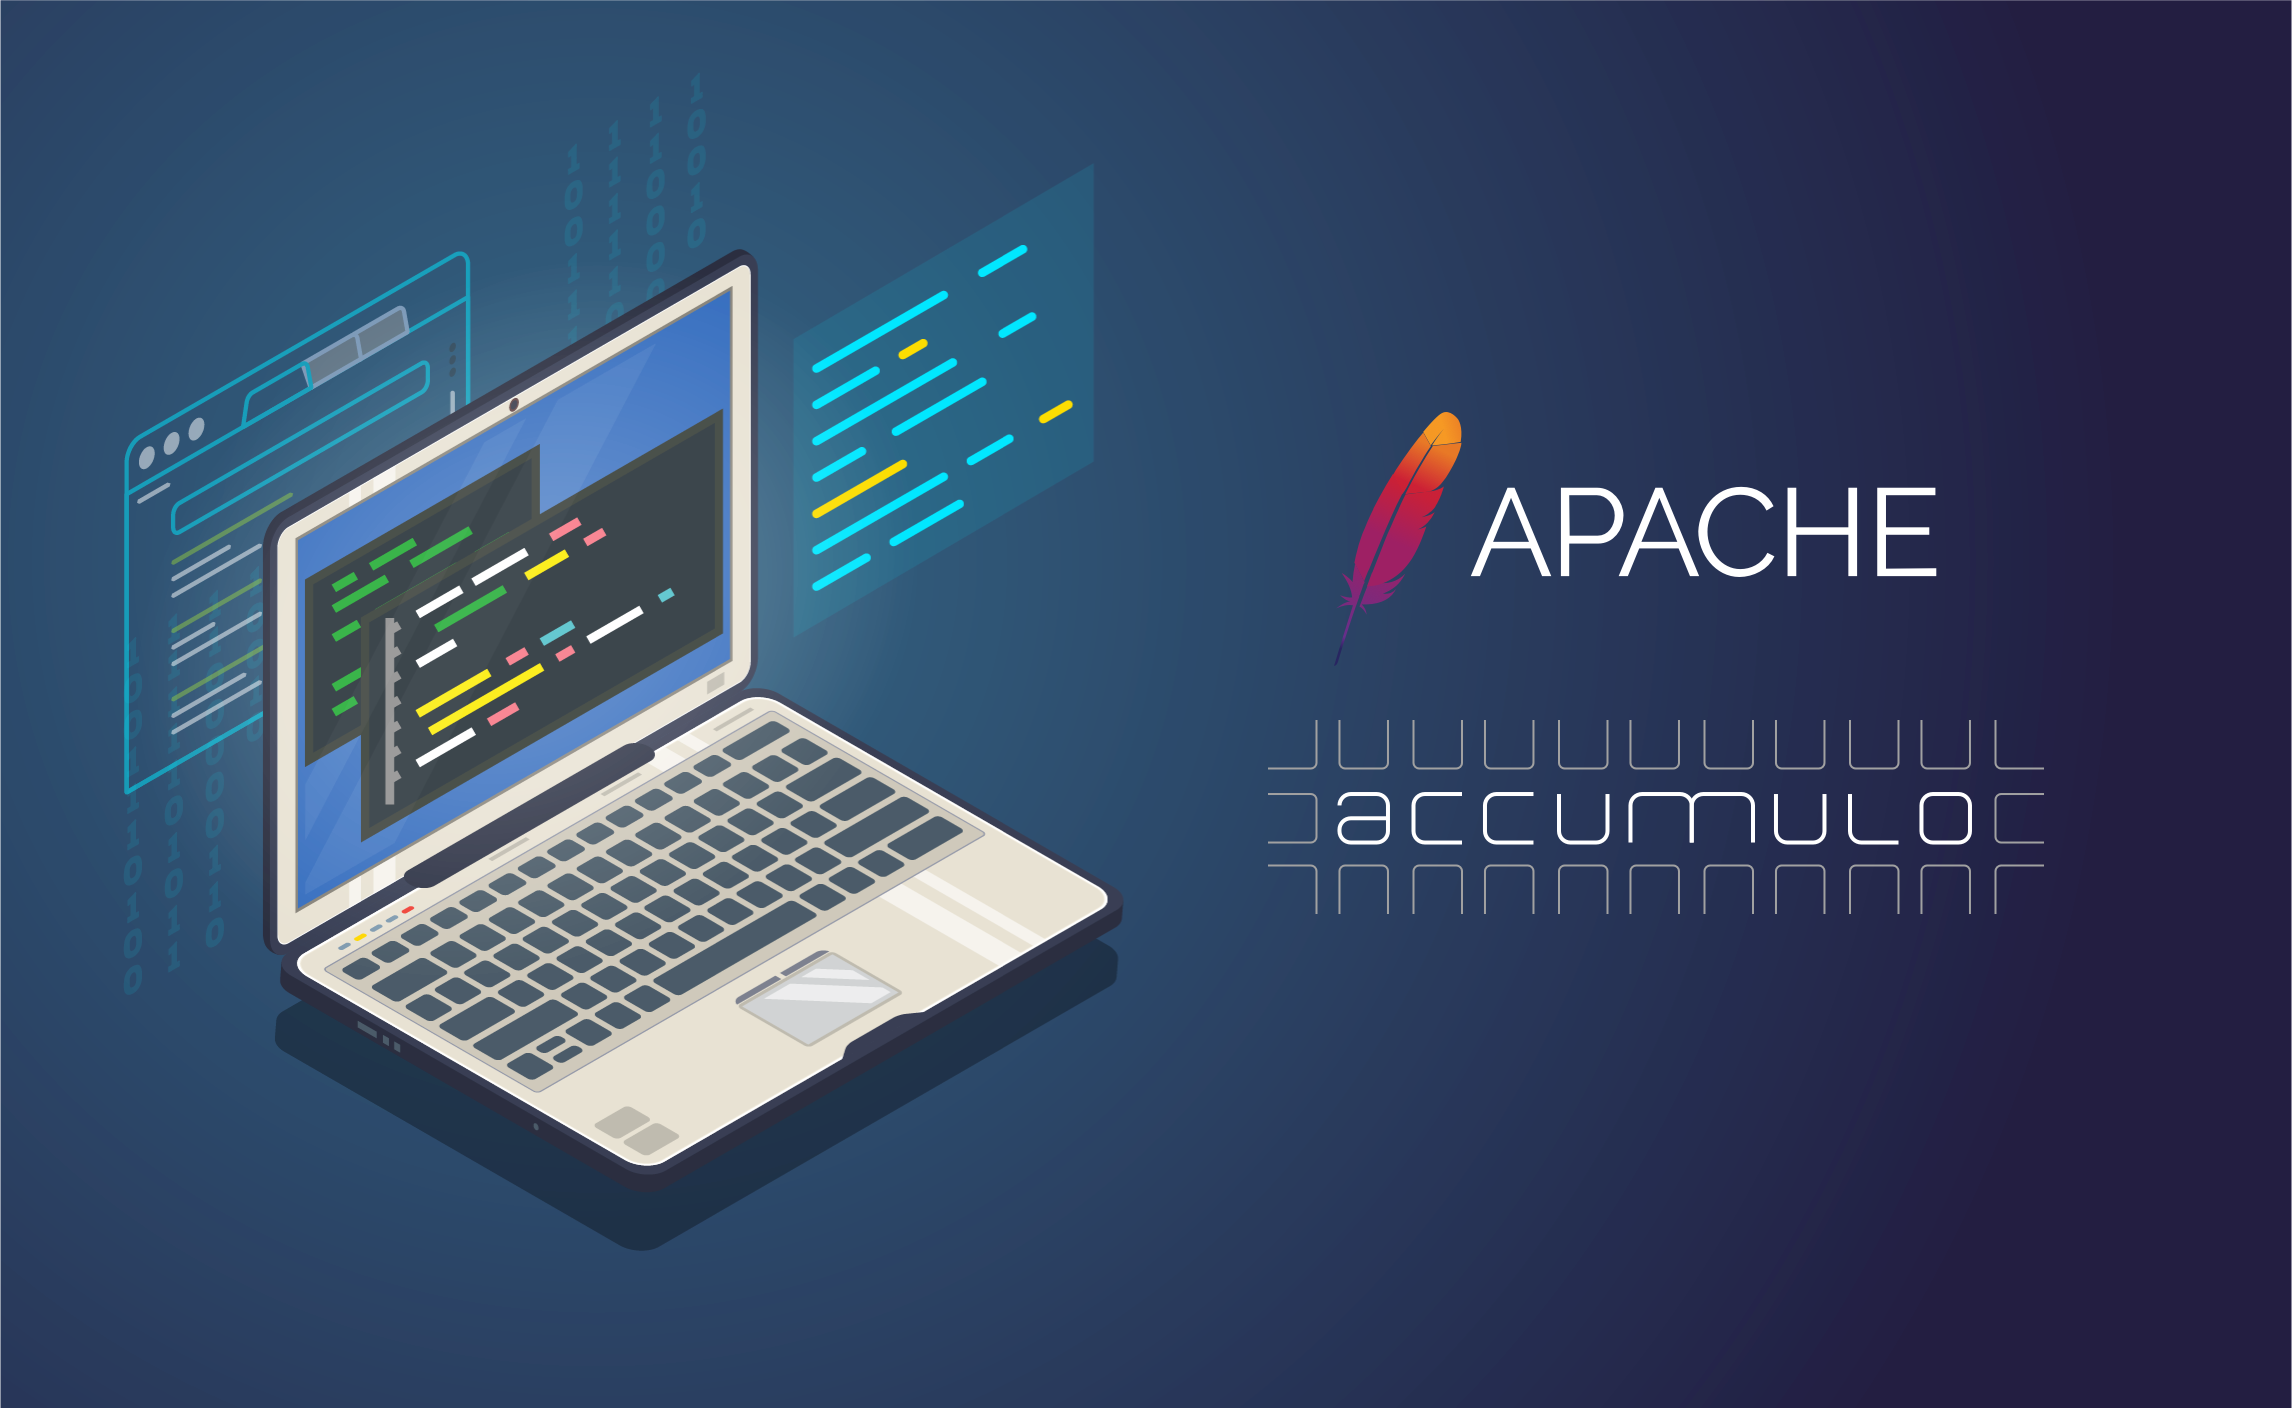 Why Accumulo?